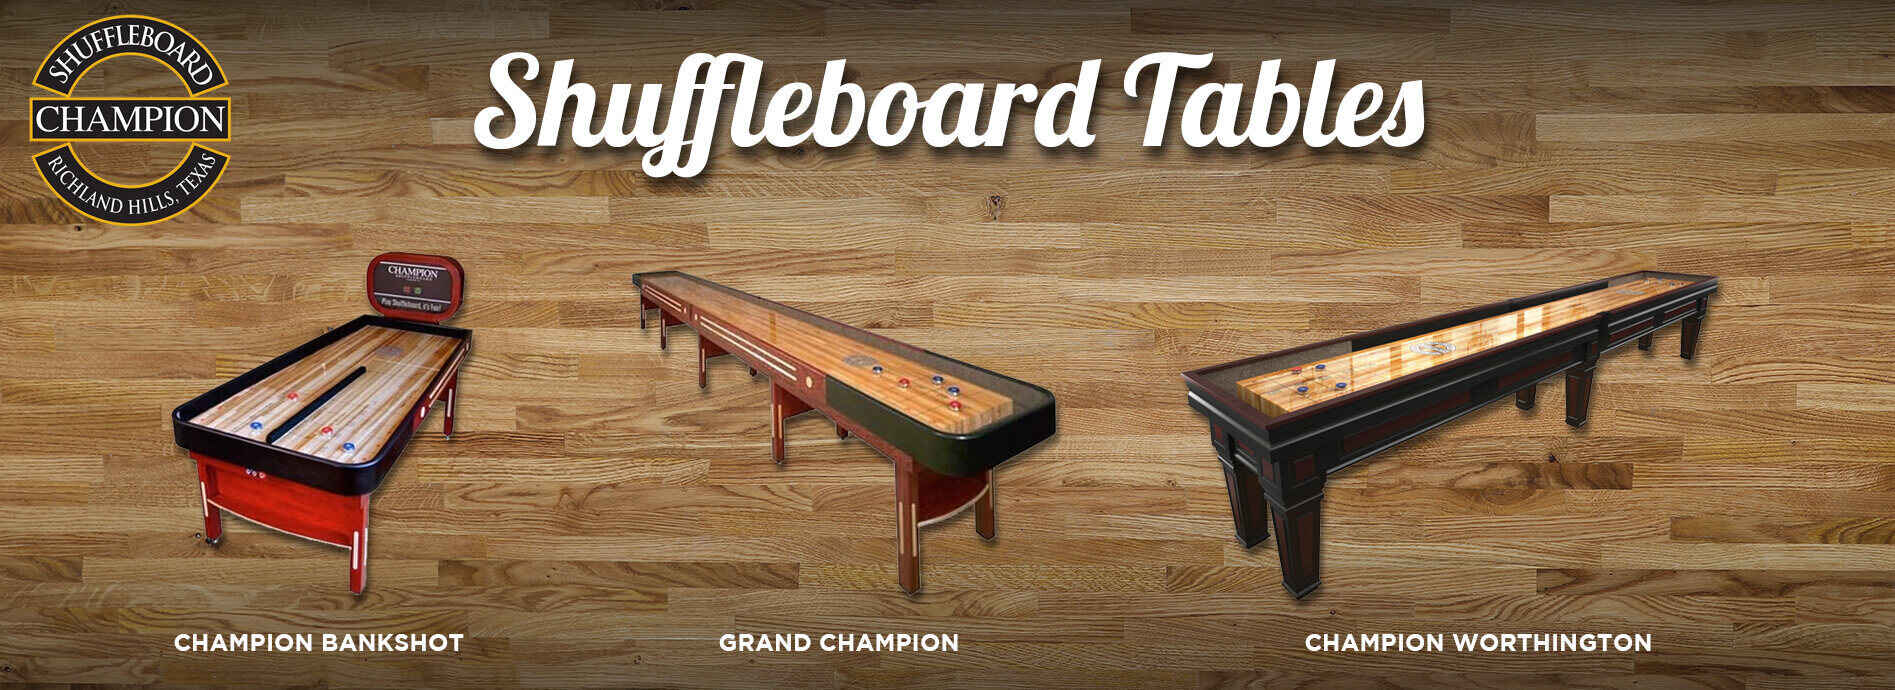 Shuffleboard Table Rentals from Game Exchange in Denver